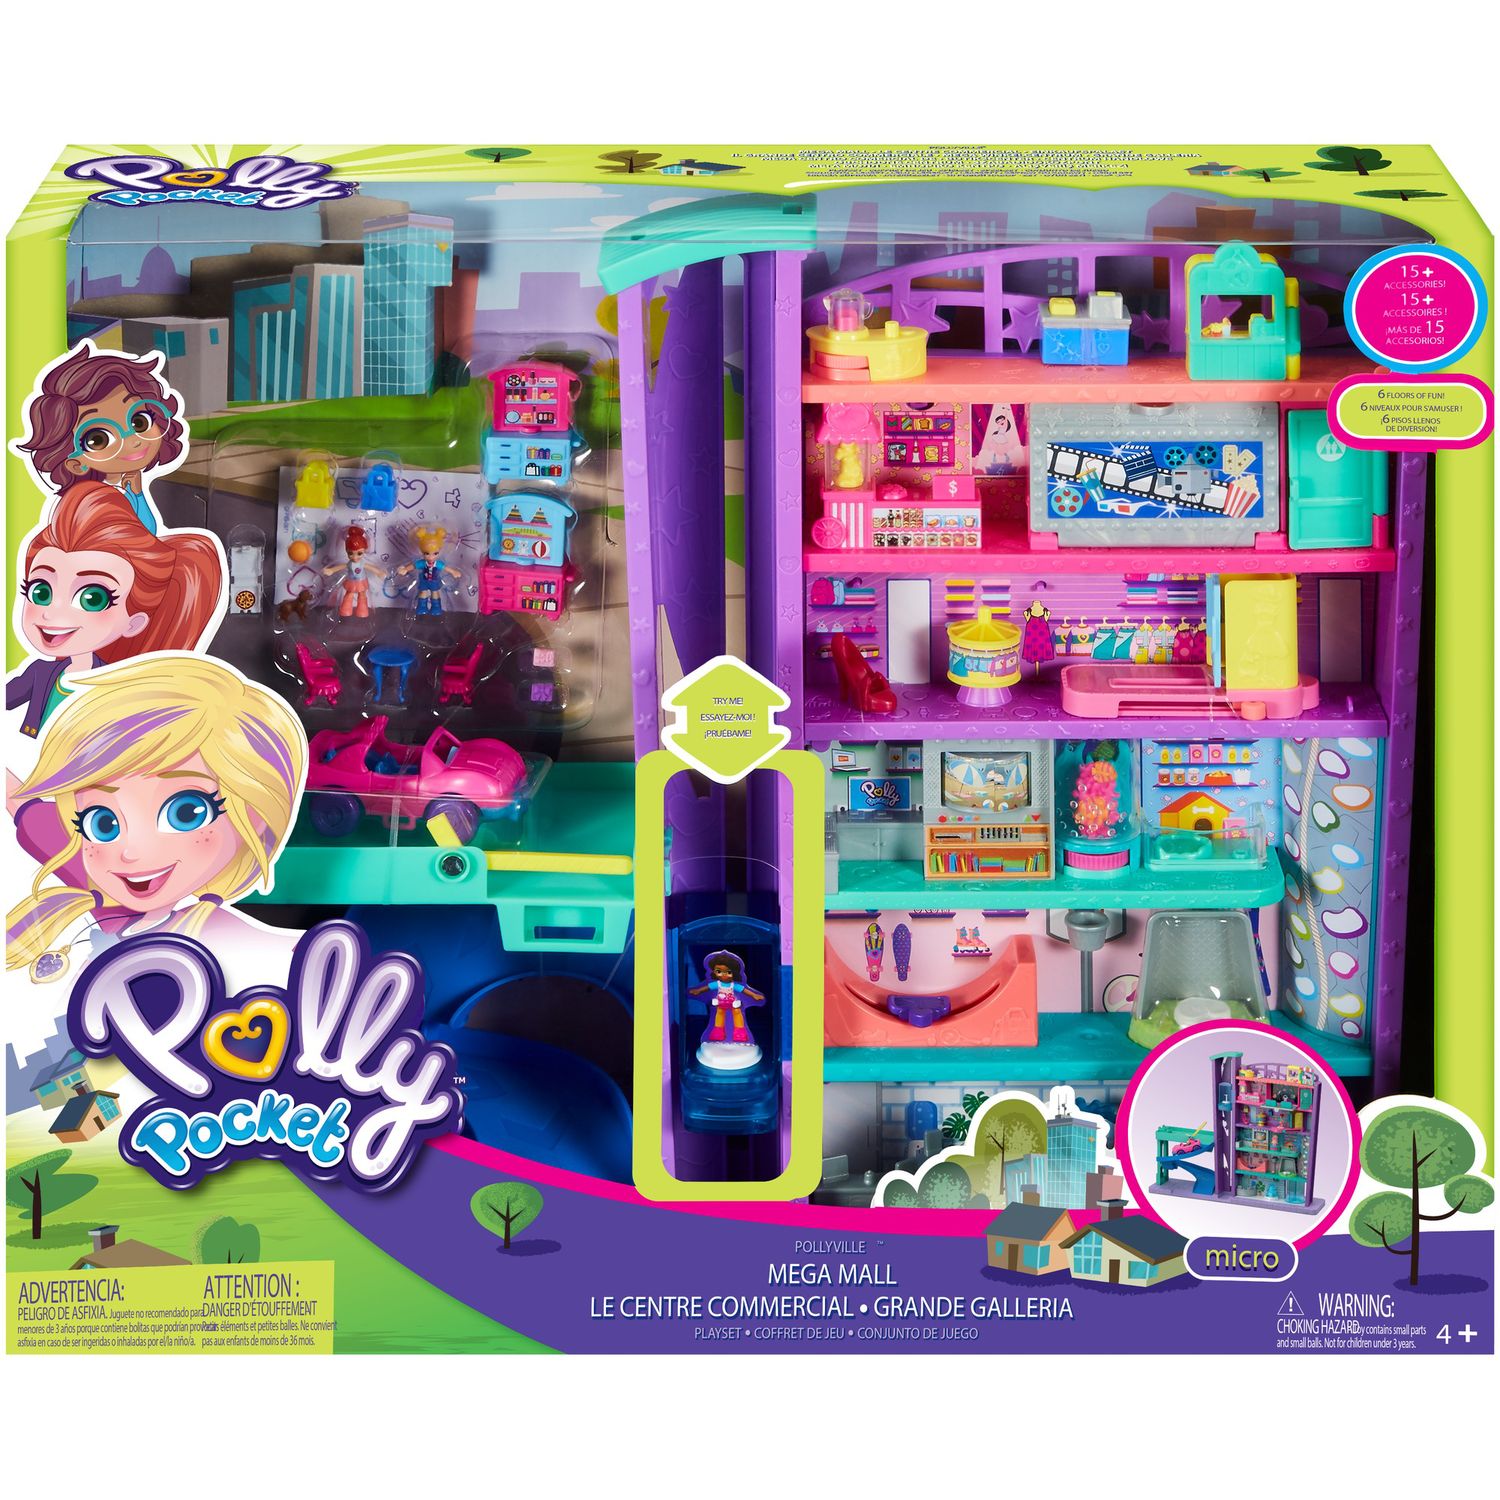 polly pocket mall game